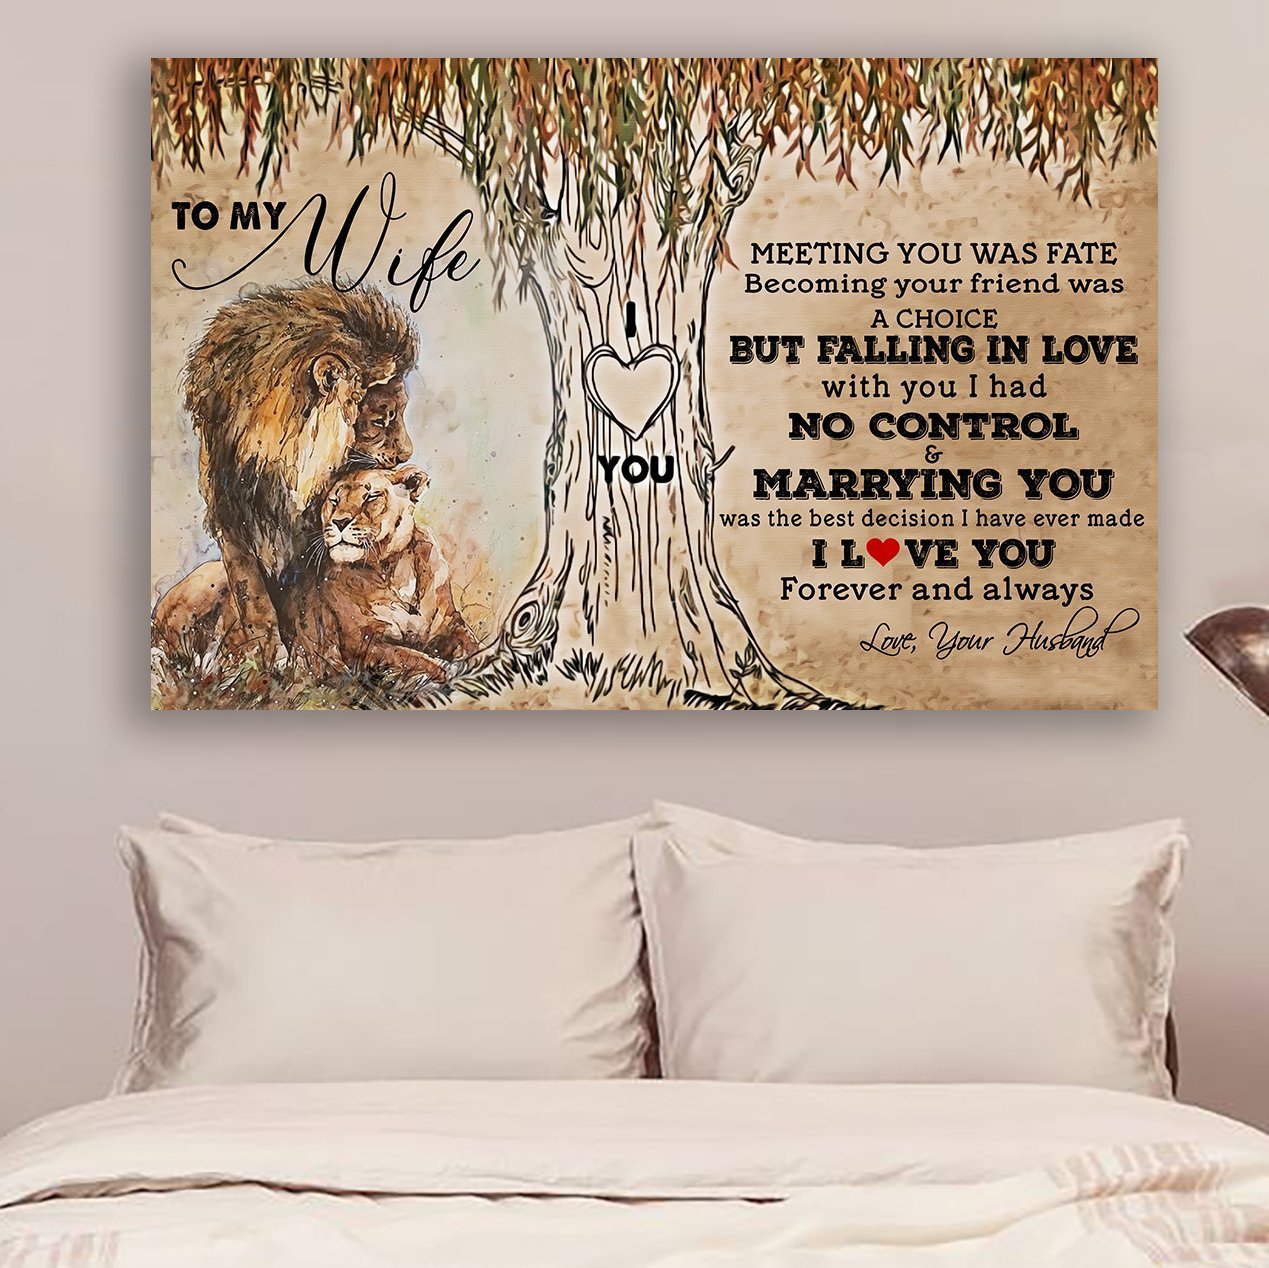 Lion Canvas and Poster Husband to wife Meeting you was fate wall decor visual art 1598332155736.jpg